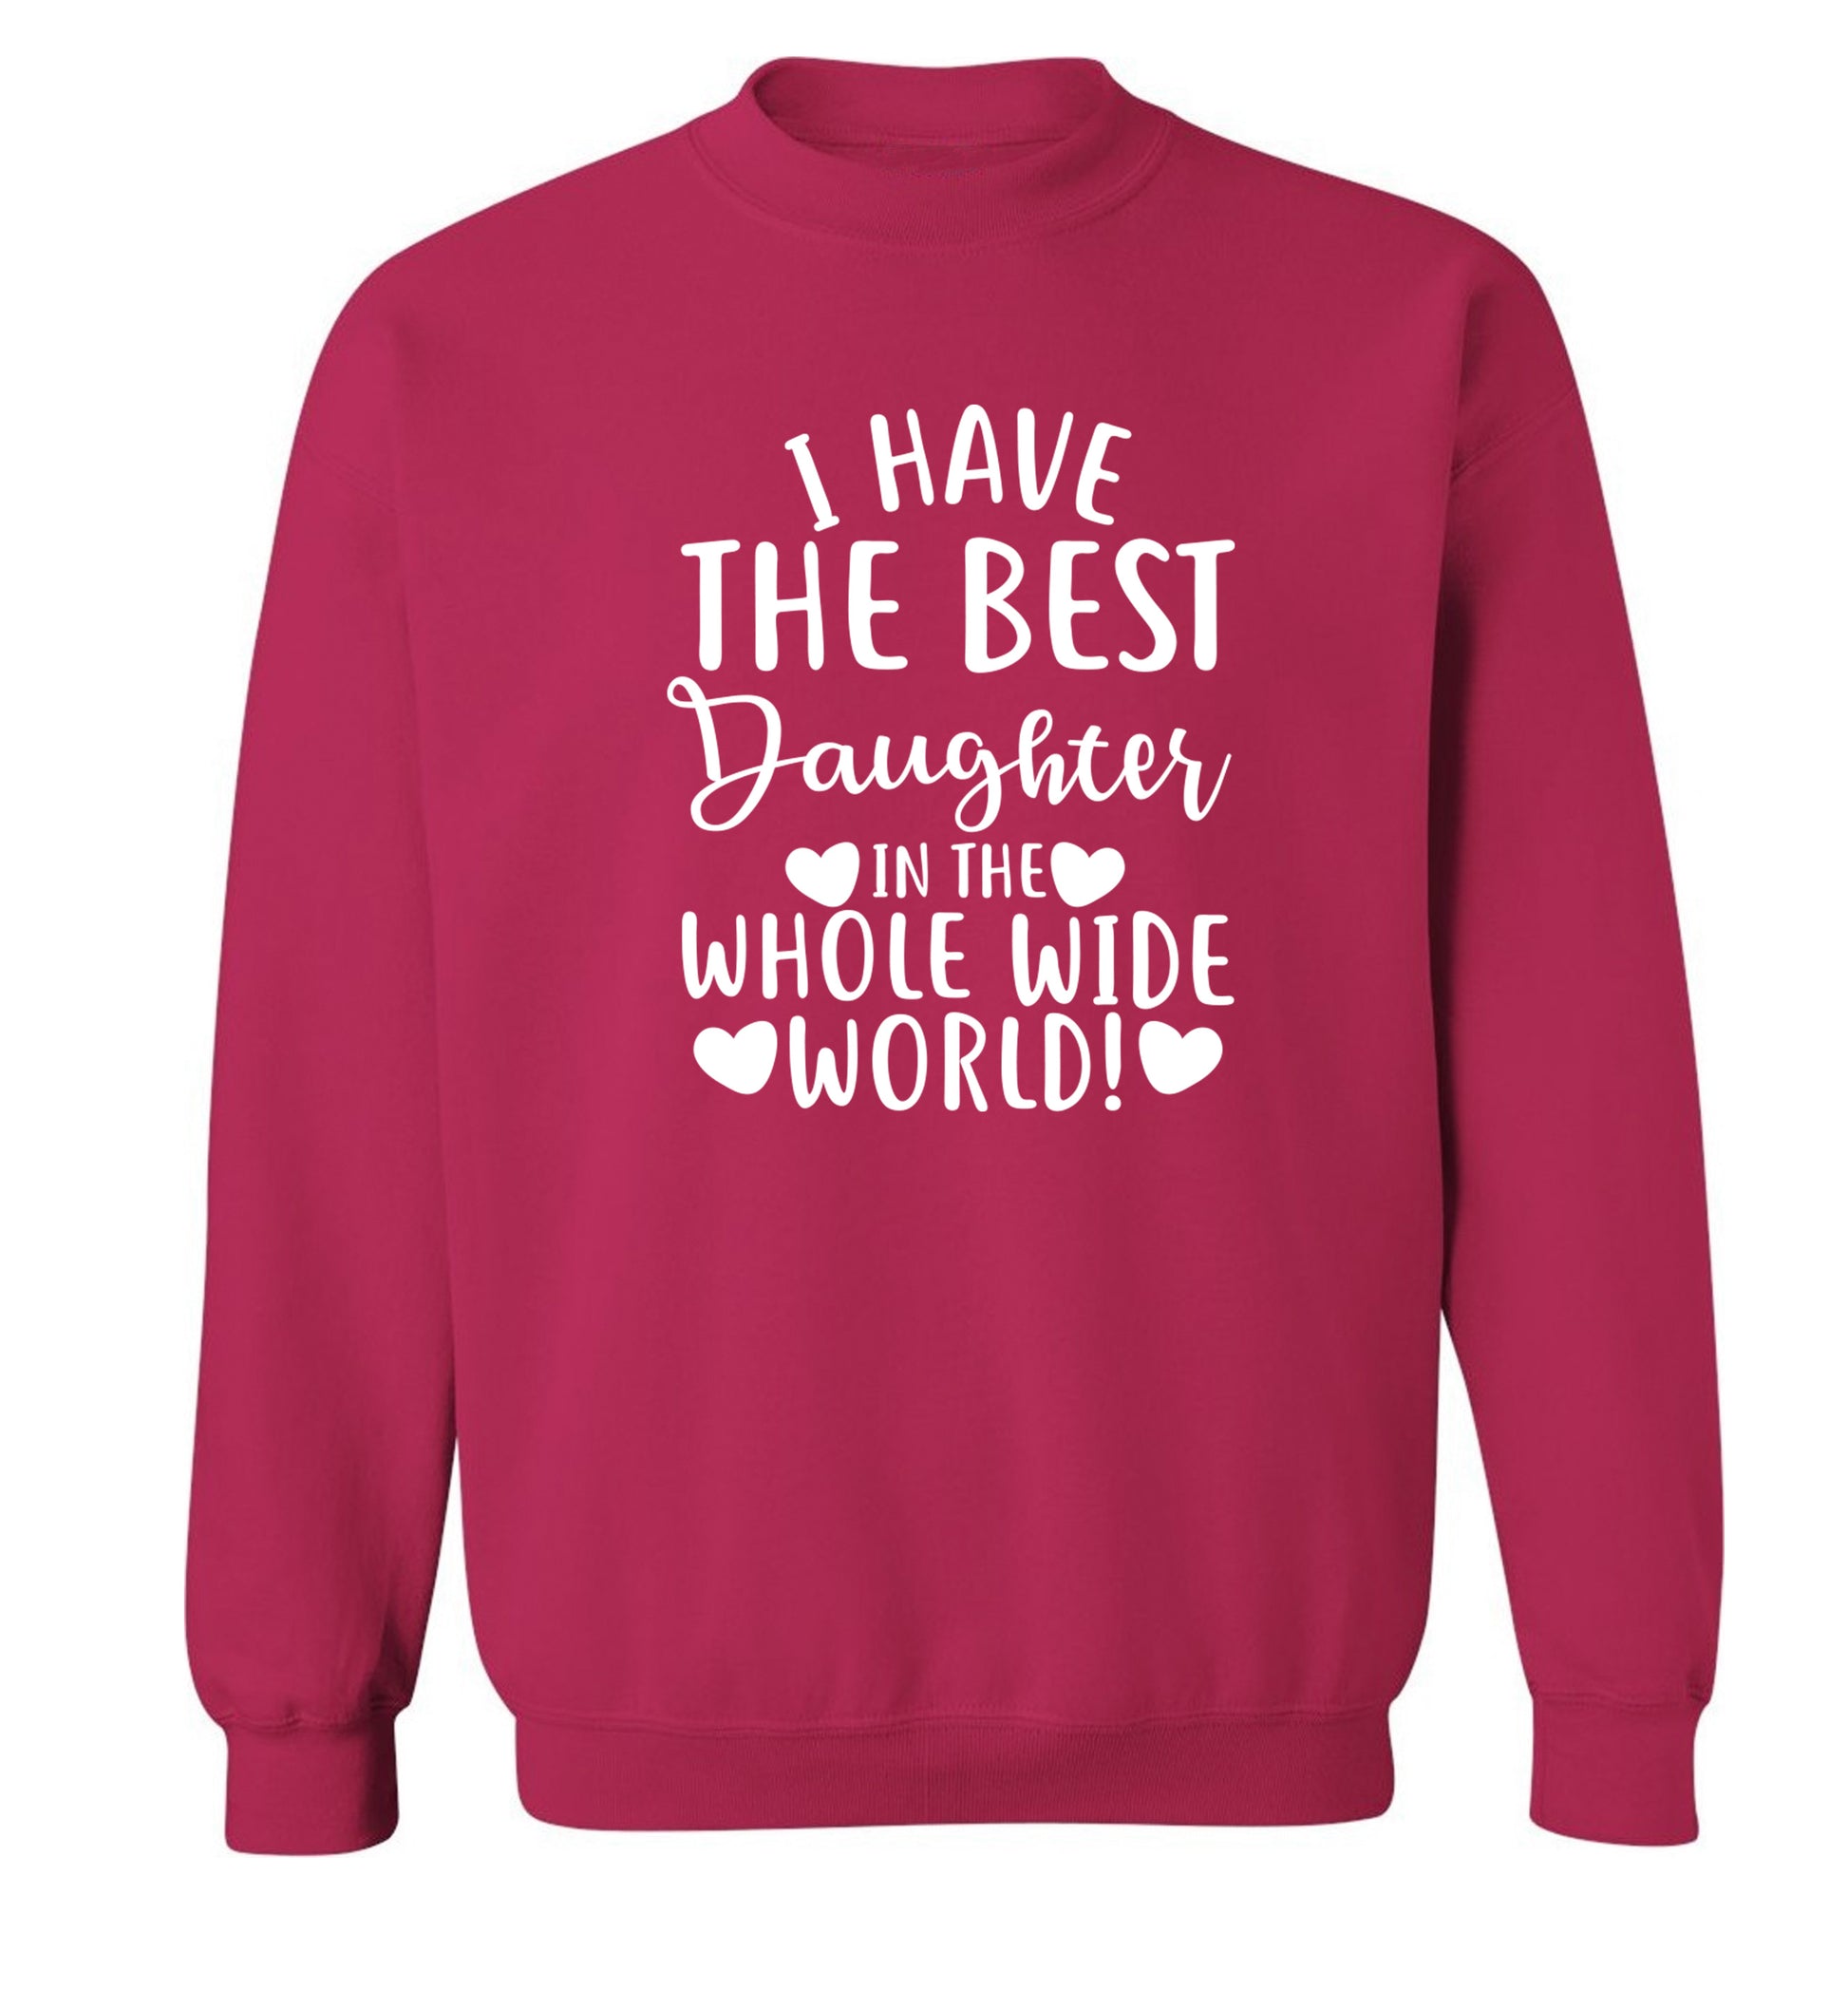 I have the best daughter in the whole wide world! Adult's unisex pink Sweater 2XL